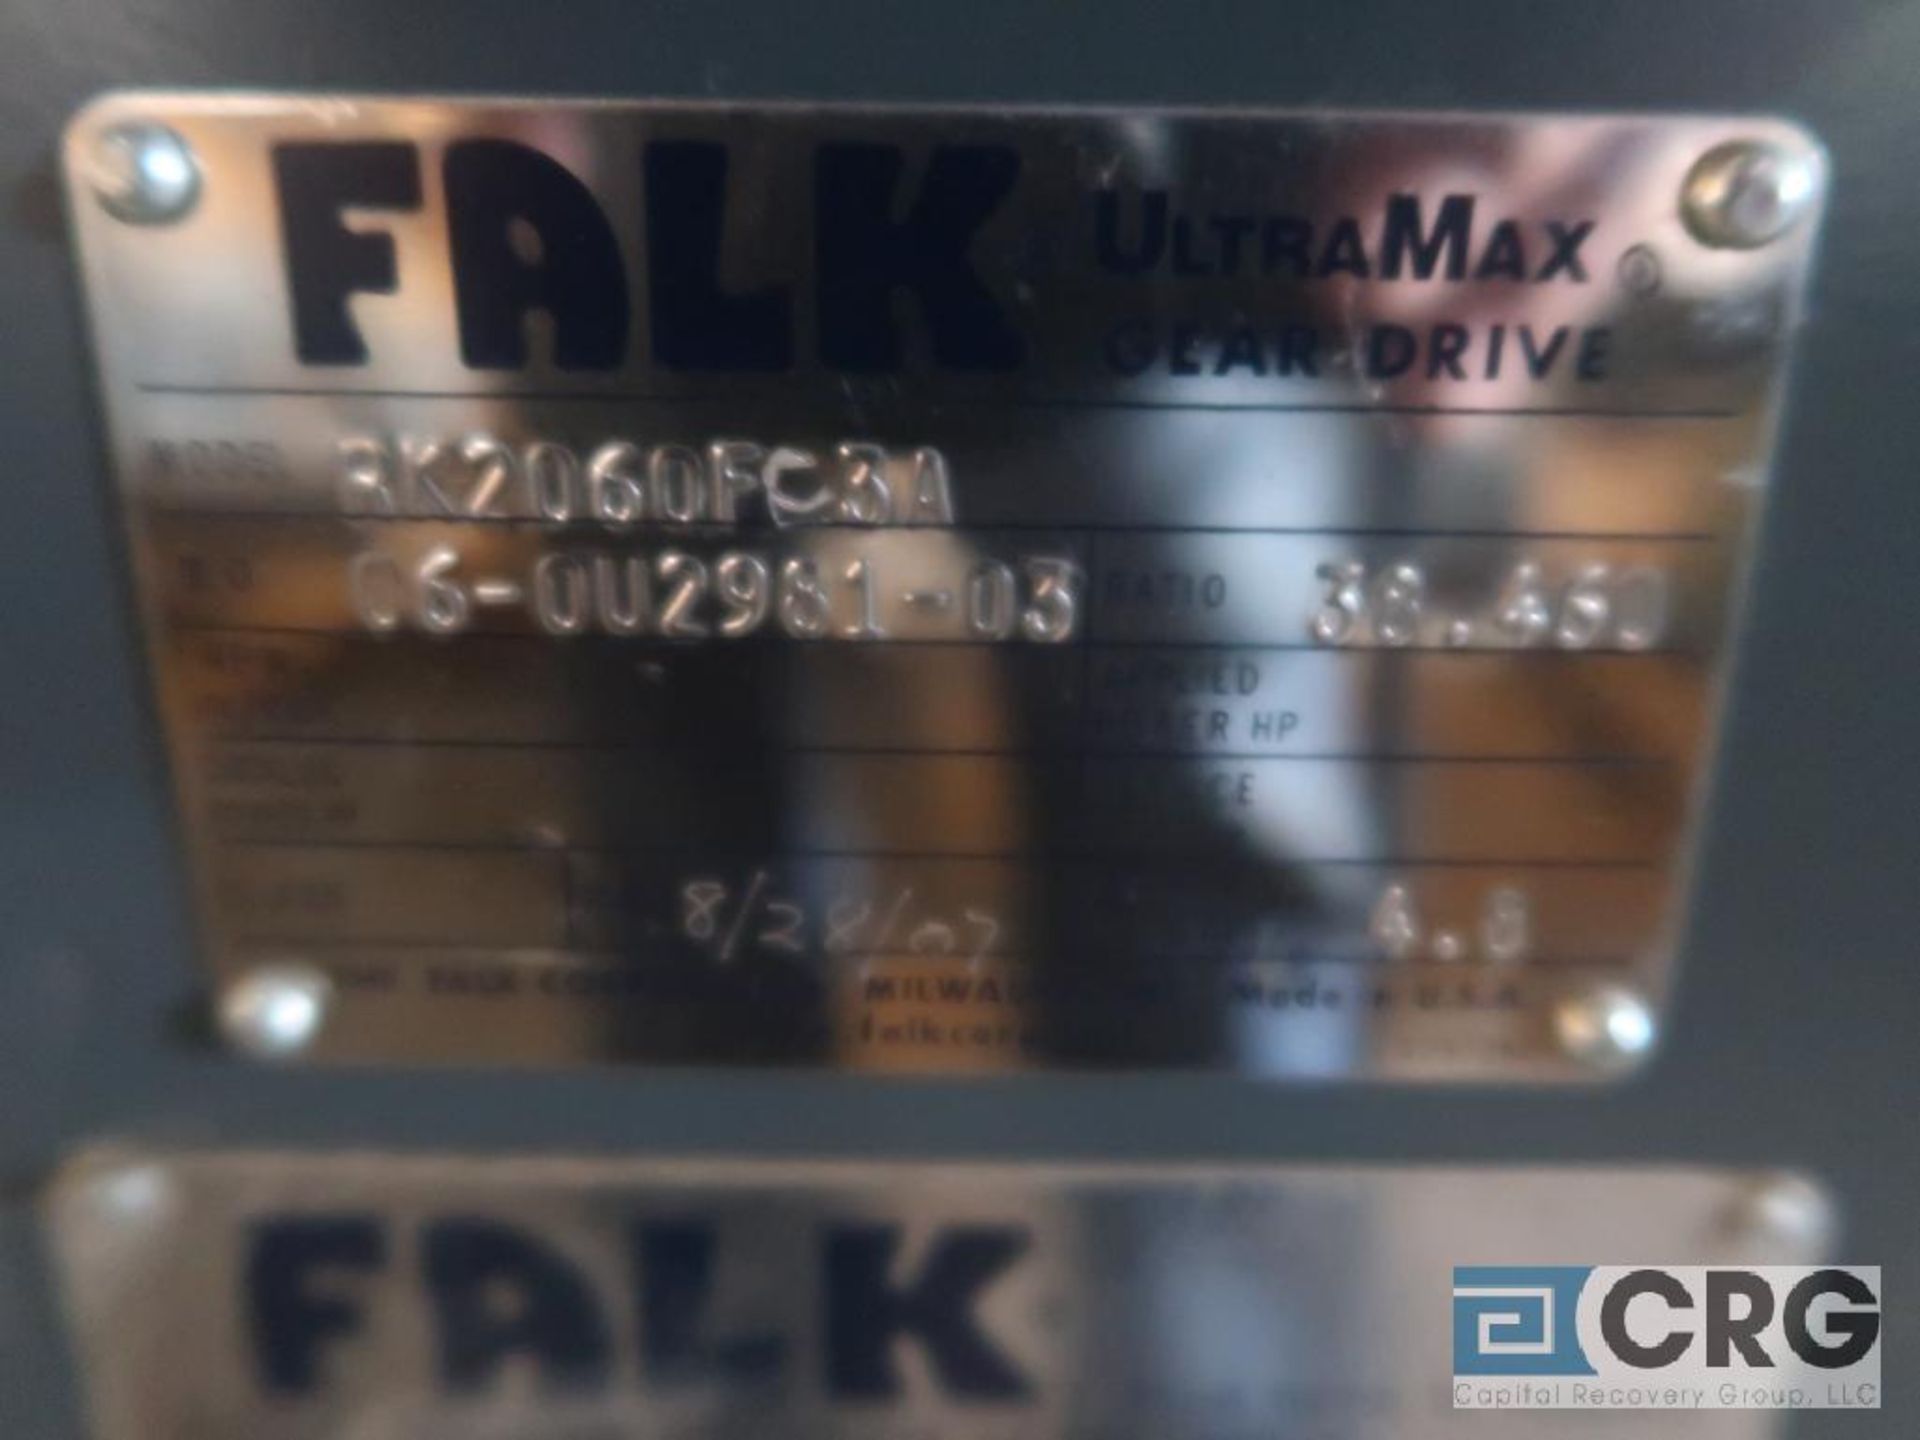 Falk RK 2060 FC3A gear drive, ratio-38.460, s/n 298103 (Next Bay Cage Area) - Image 2 of 2